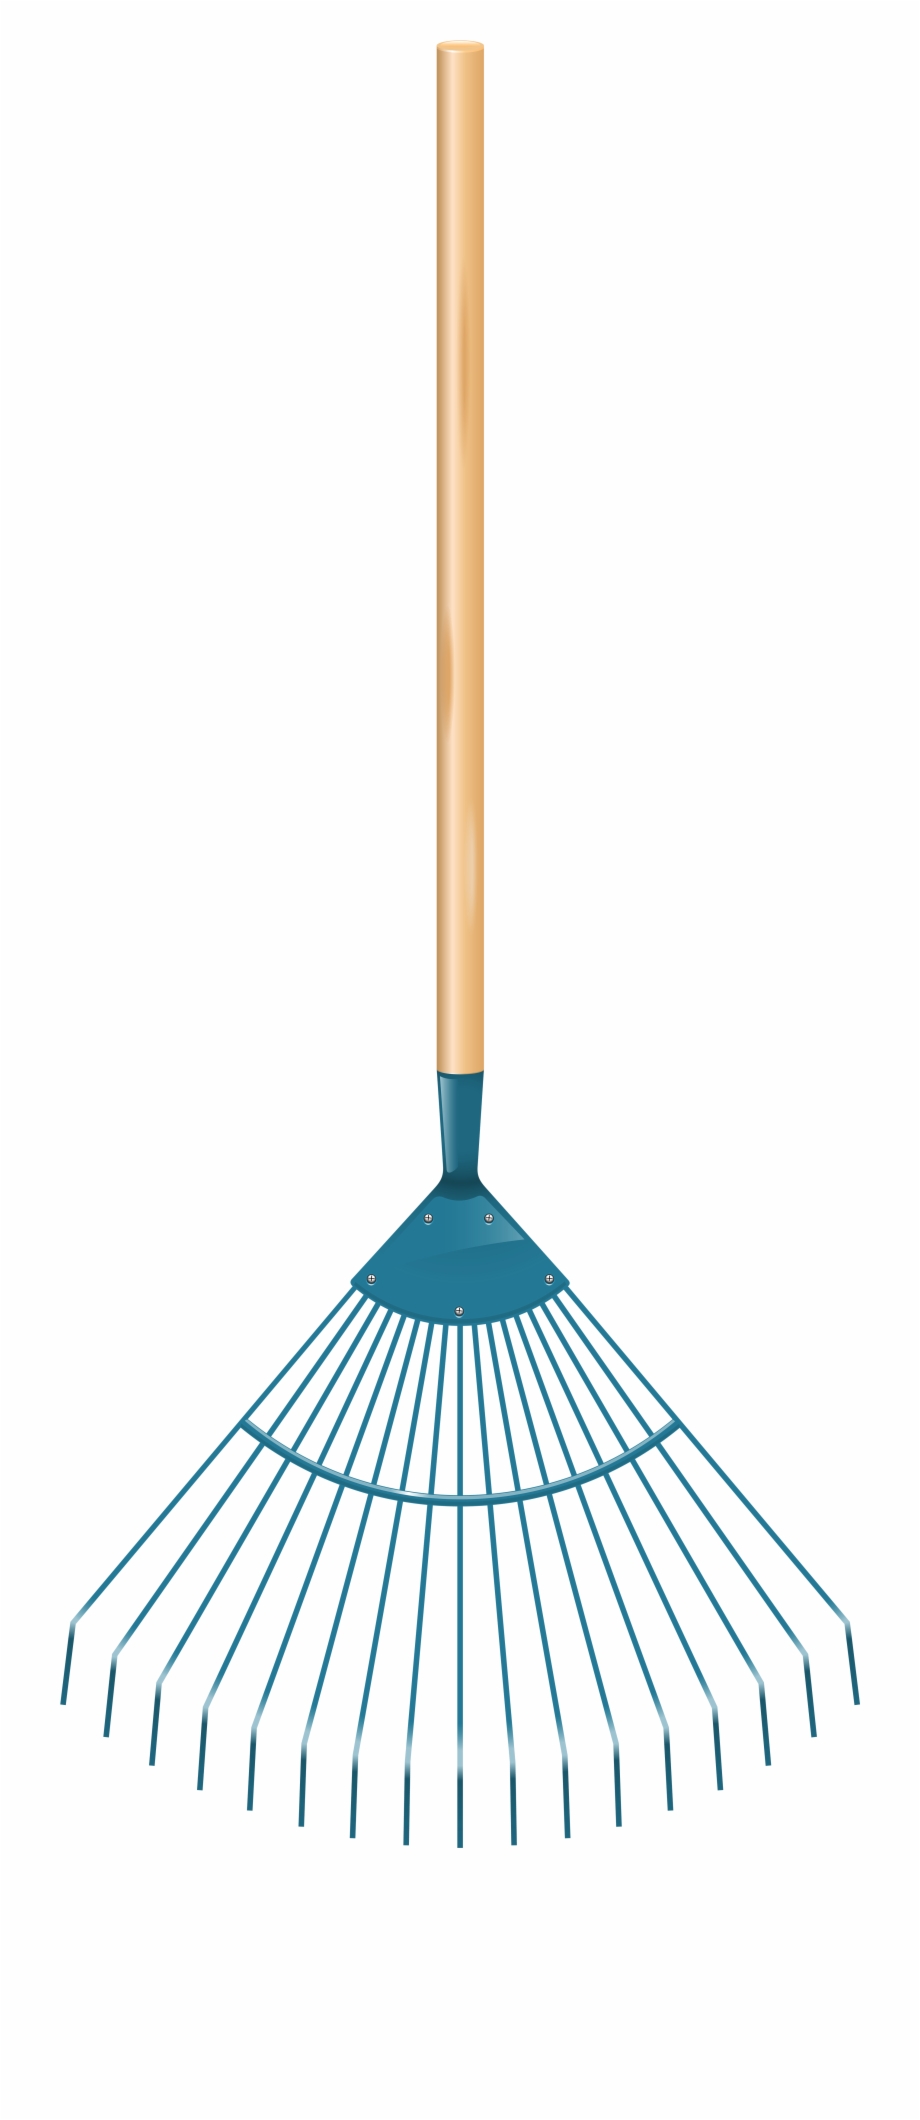 Free Rake Clipart Black And White, Download Free Clip Art, Free Clip ...